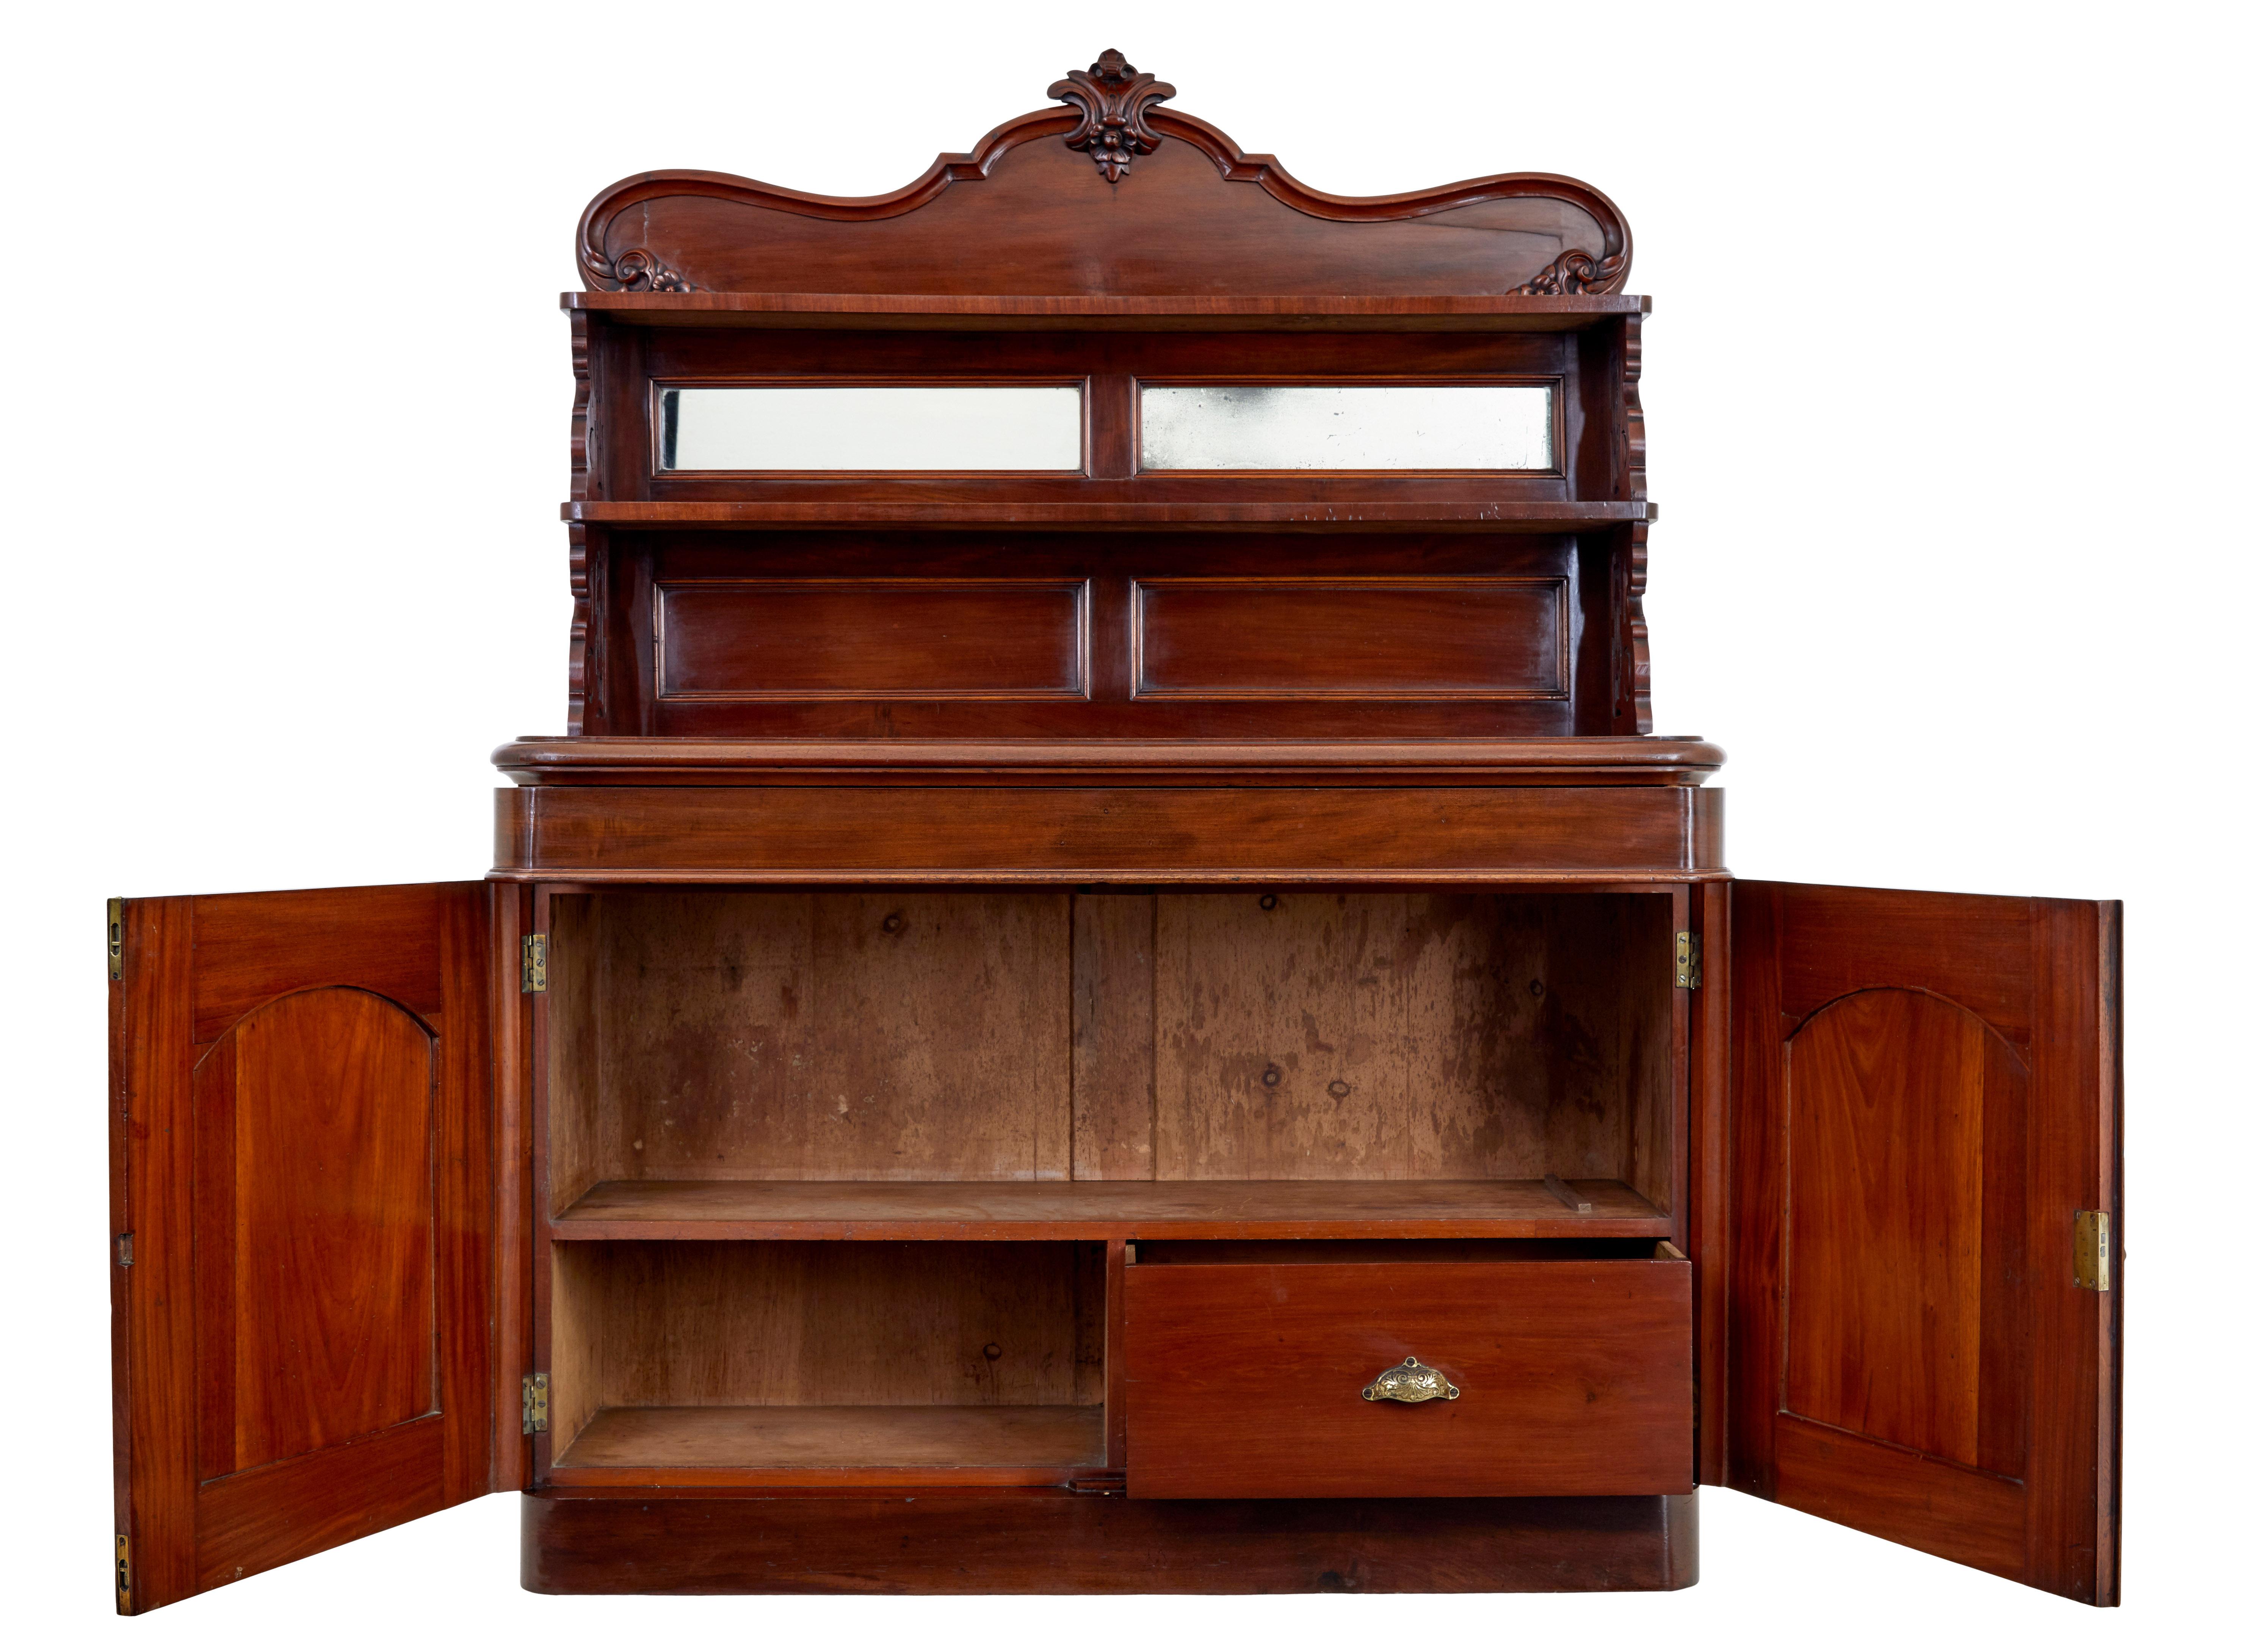 19th century French mahogany chiffonier sideboard circa 1880.

Chiffonier with aesthetic movement influences, made in rich mahogany.

Comprising of 2 sections. The top section with carved ornate gallery and shelf, below which 2 small mirrors above a